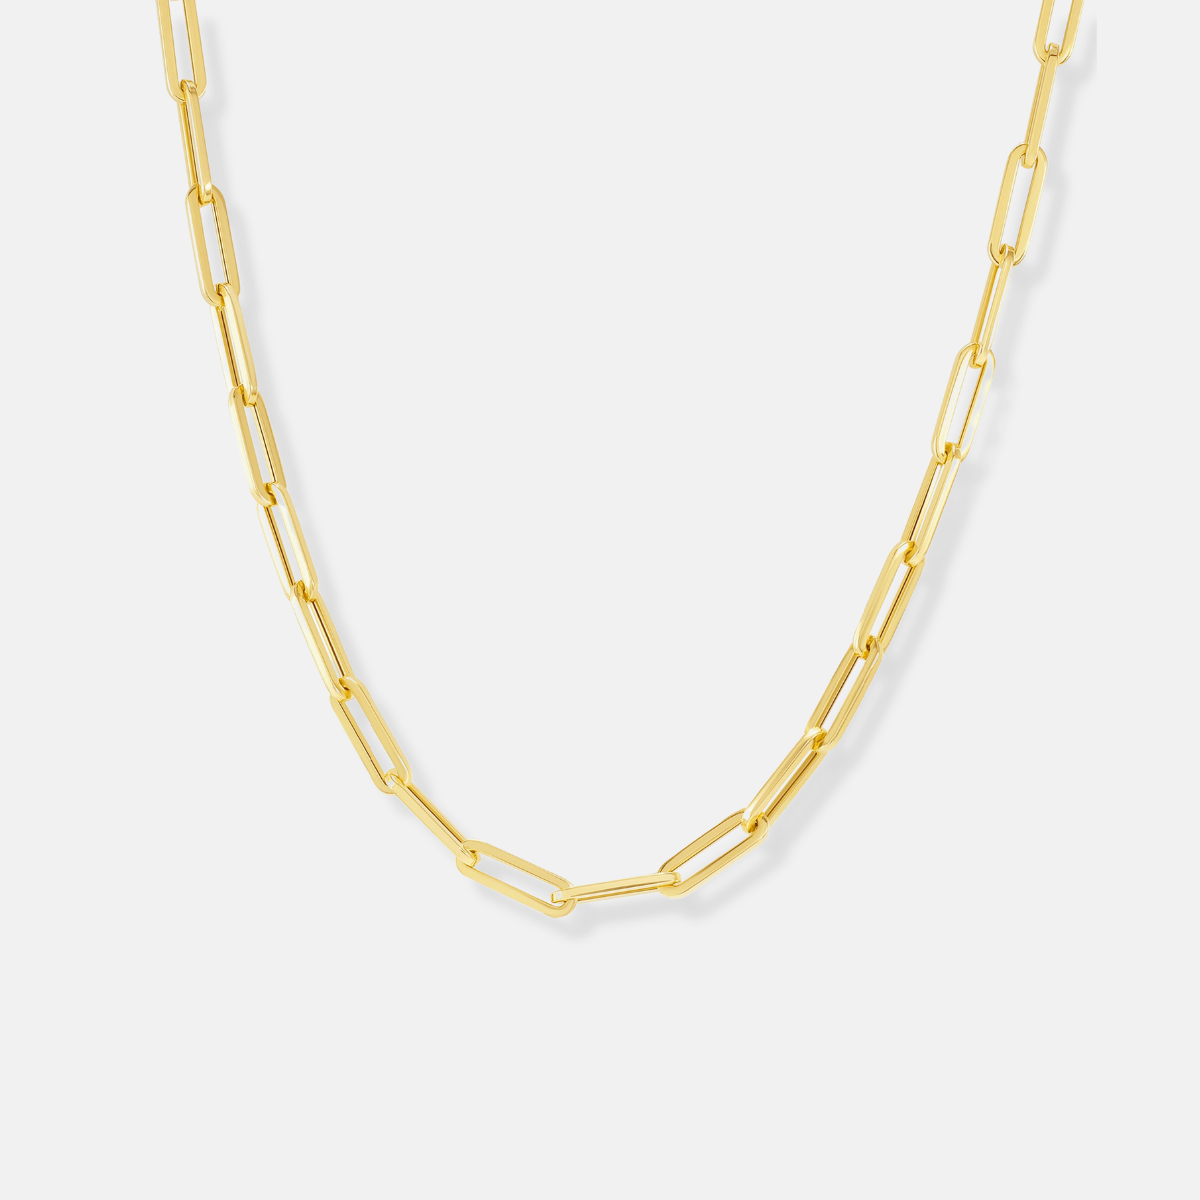 paperclip chain necklace - heavy weight